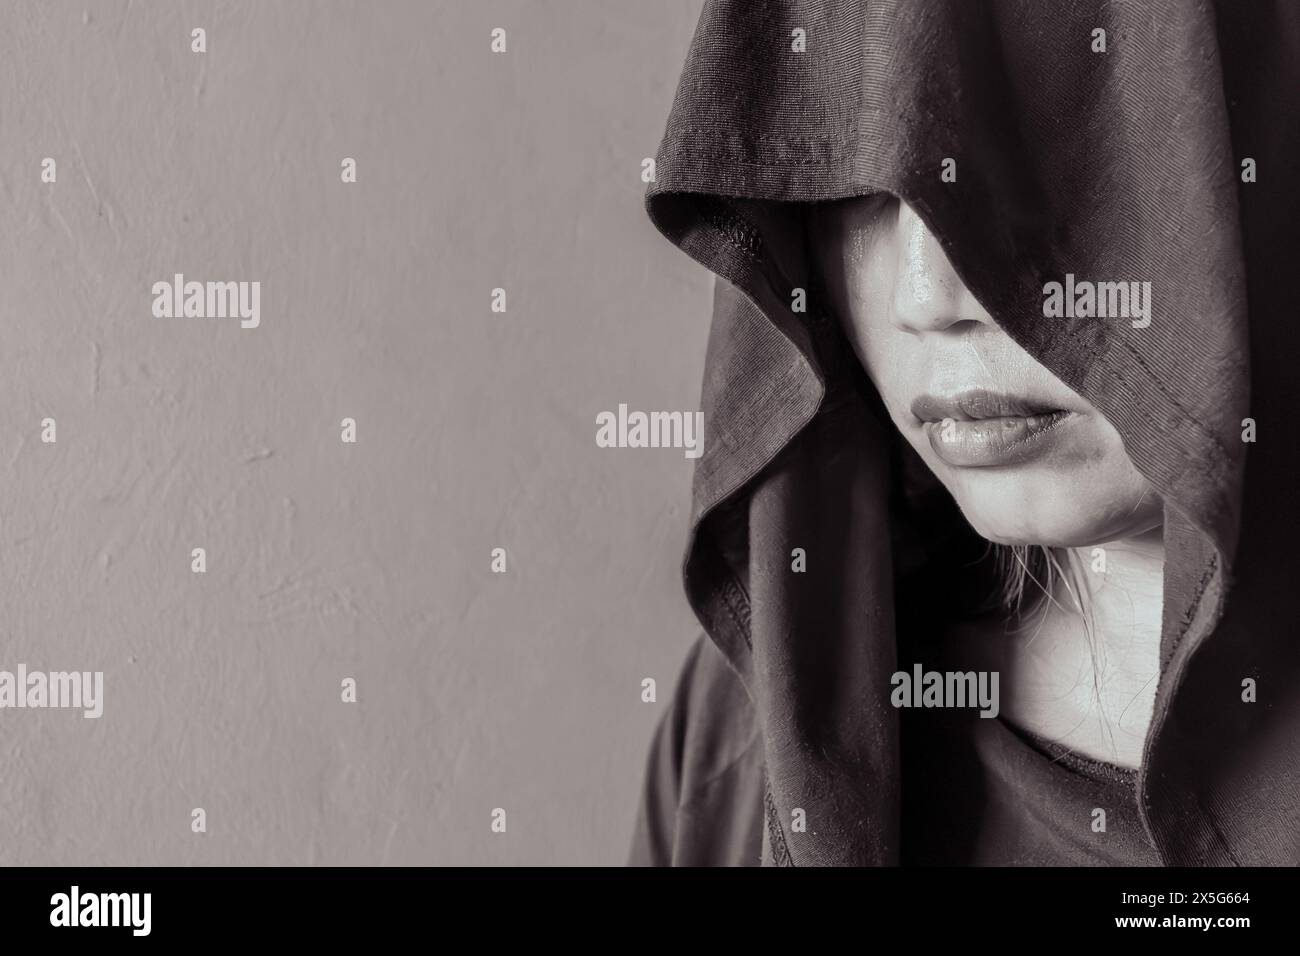 A profile view of a woman shrouded in a hood, her gaze hidden, captured in stark black and white Stock Photo